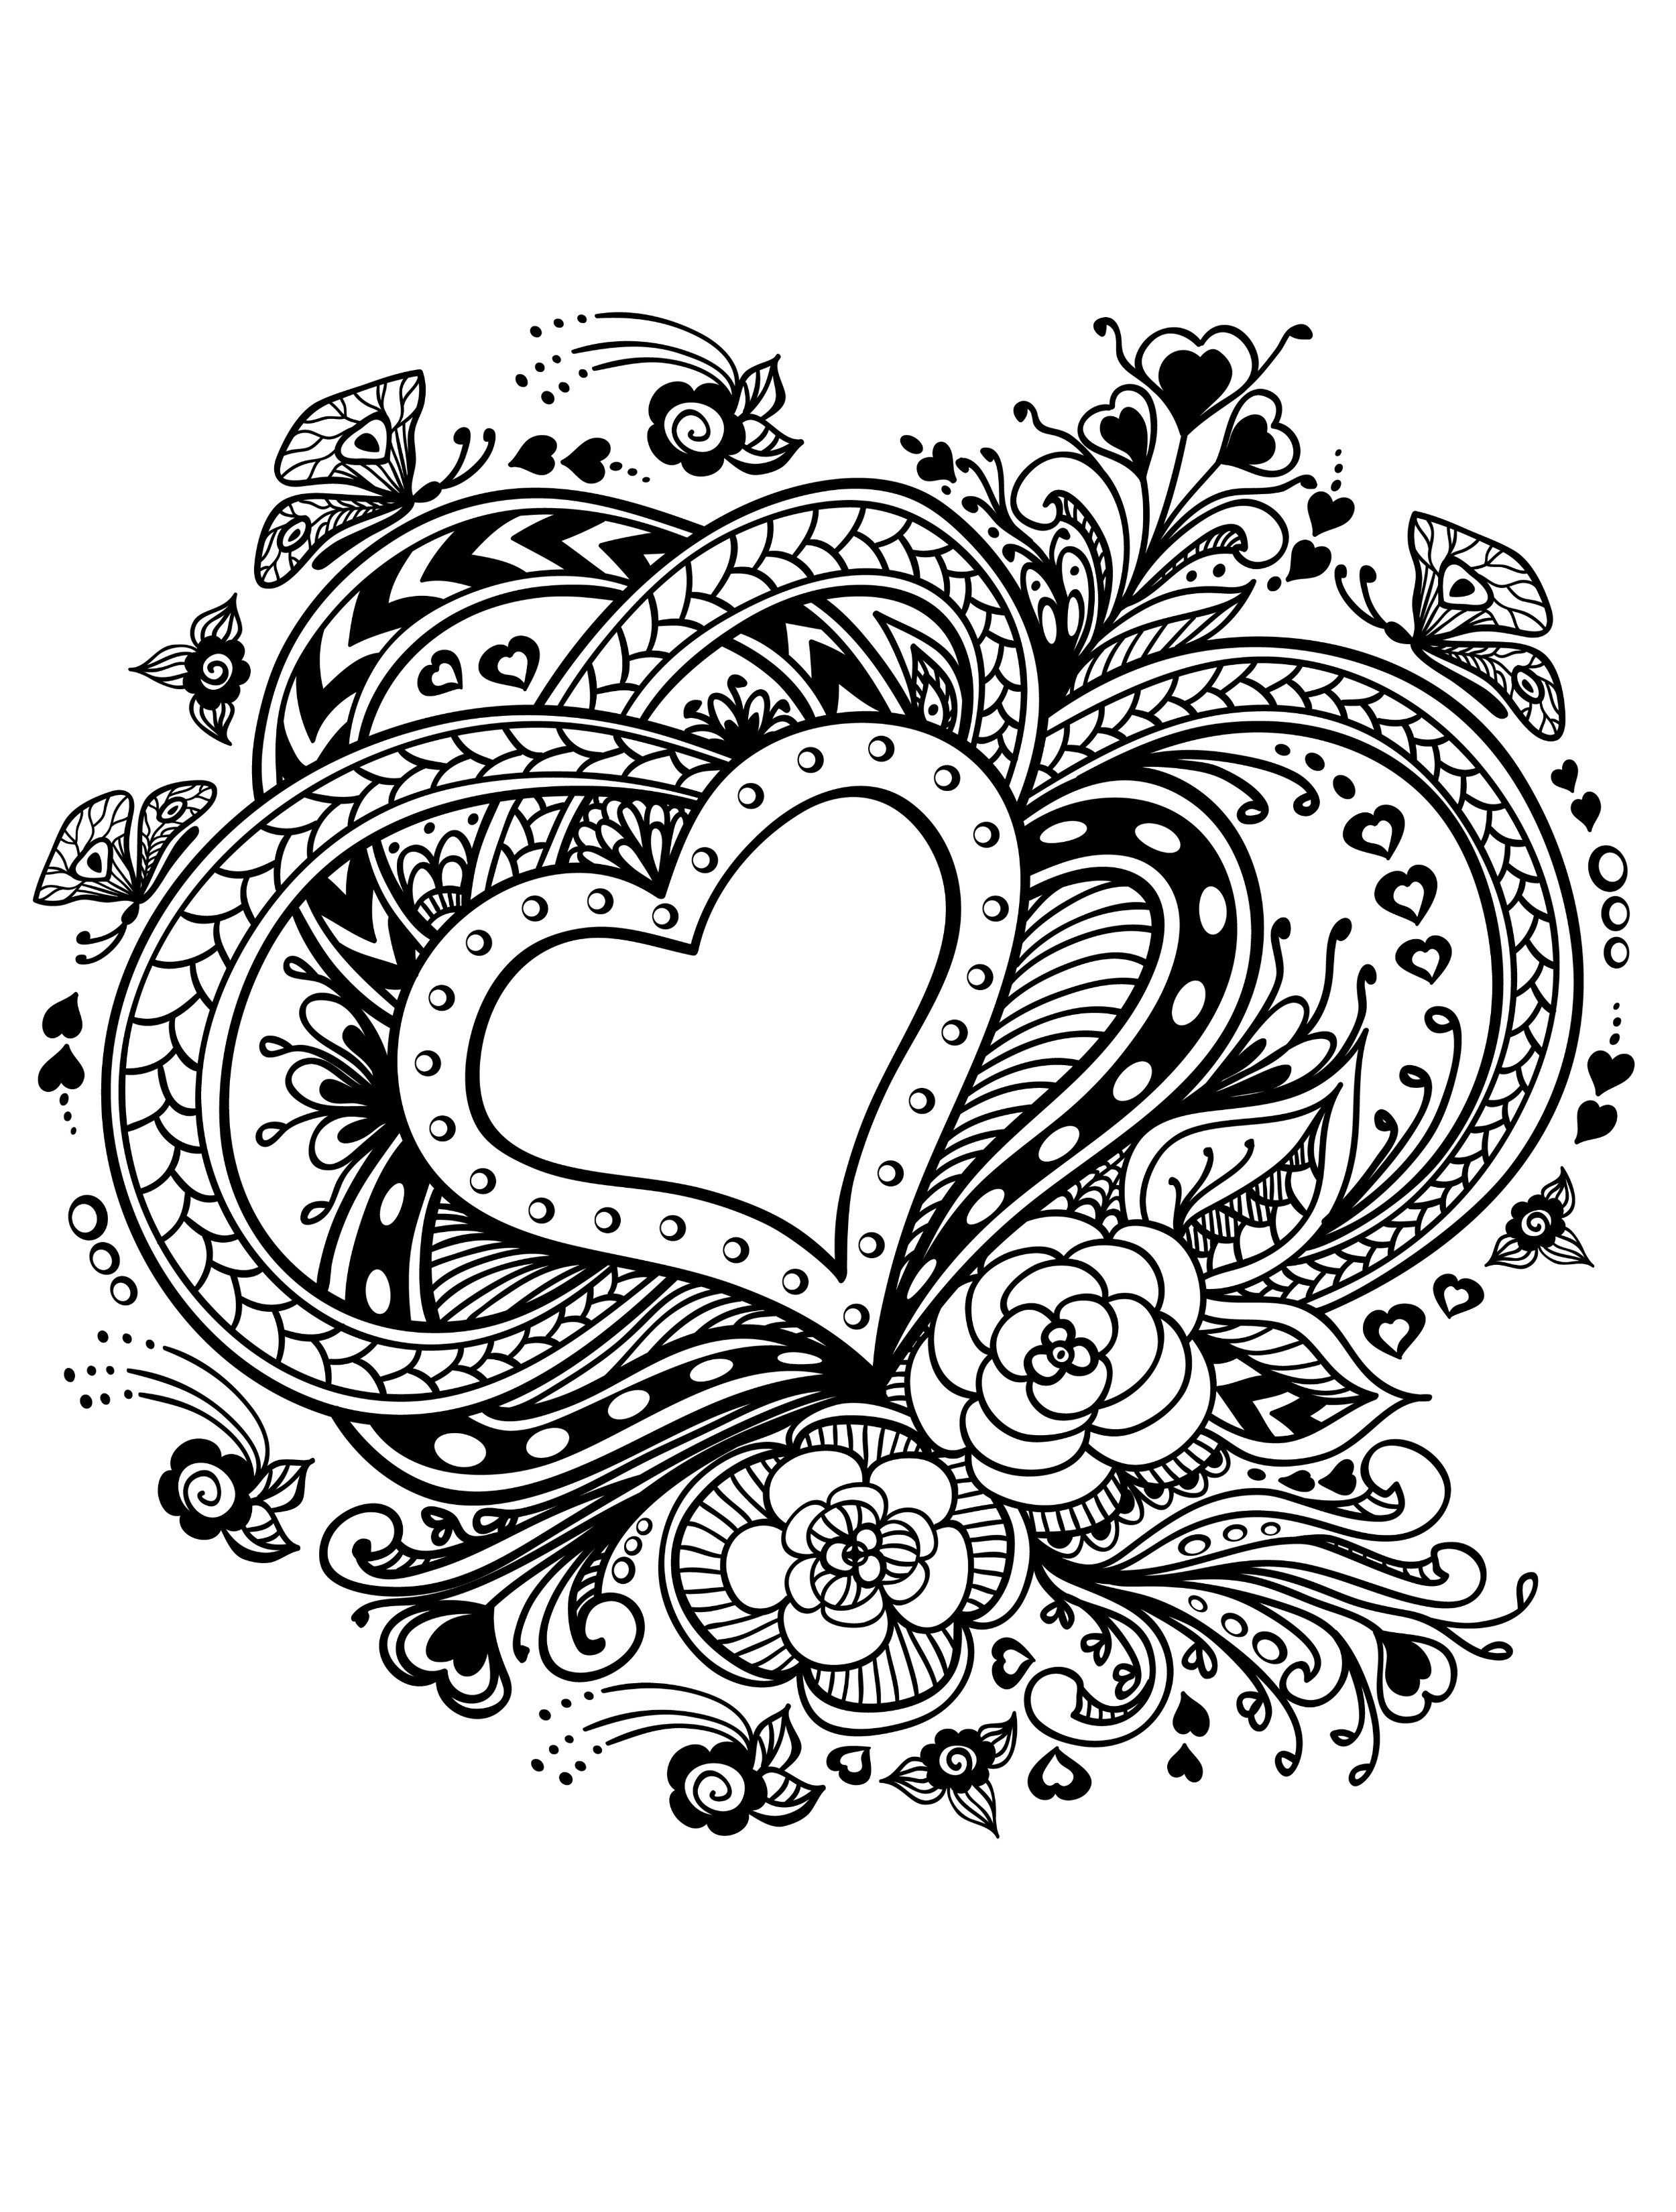 20 Free Printable Valentines Adult Coloring Pages | Coloring Pages - Free Printable Heart Coloring Pages